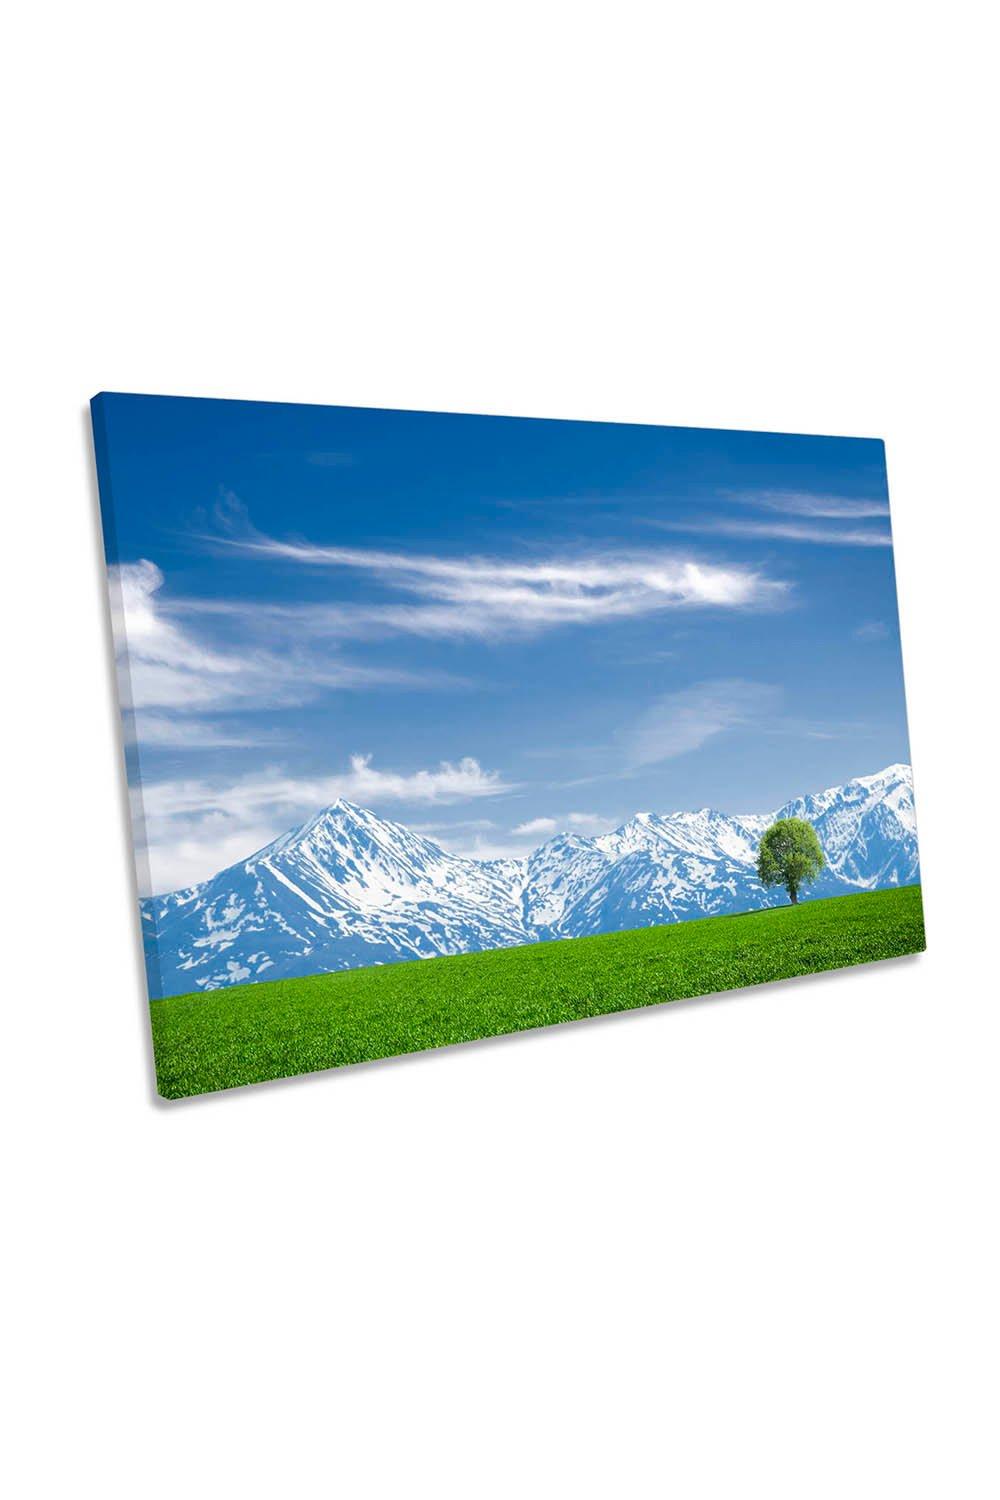 Luboten Spring Green Tree Mountains Canvas Wall Art Picture Print